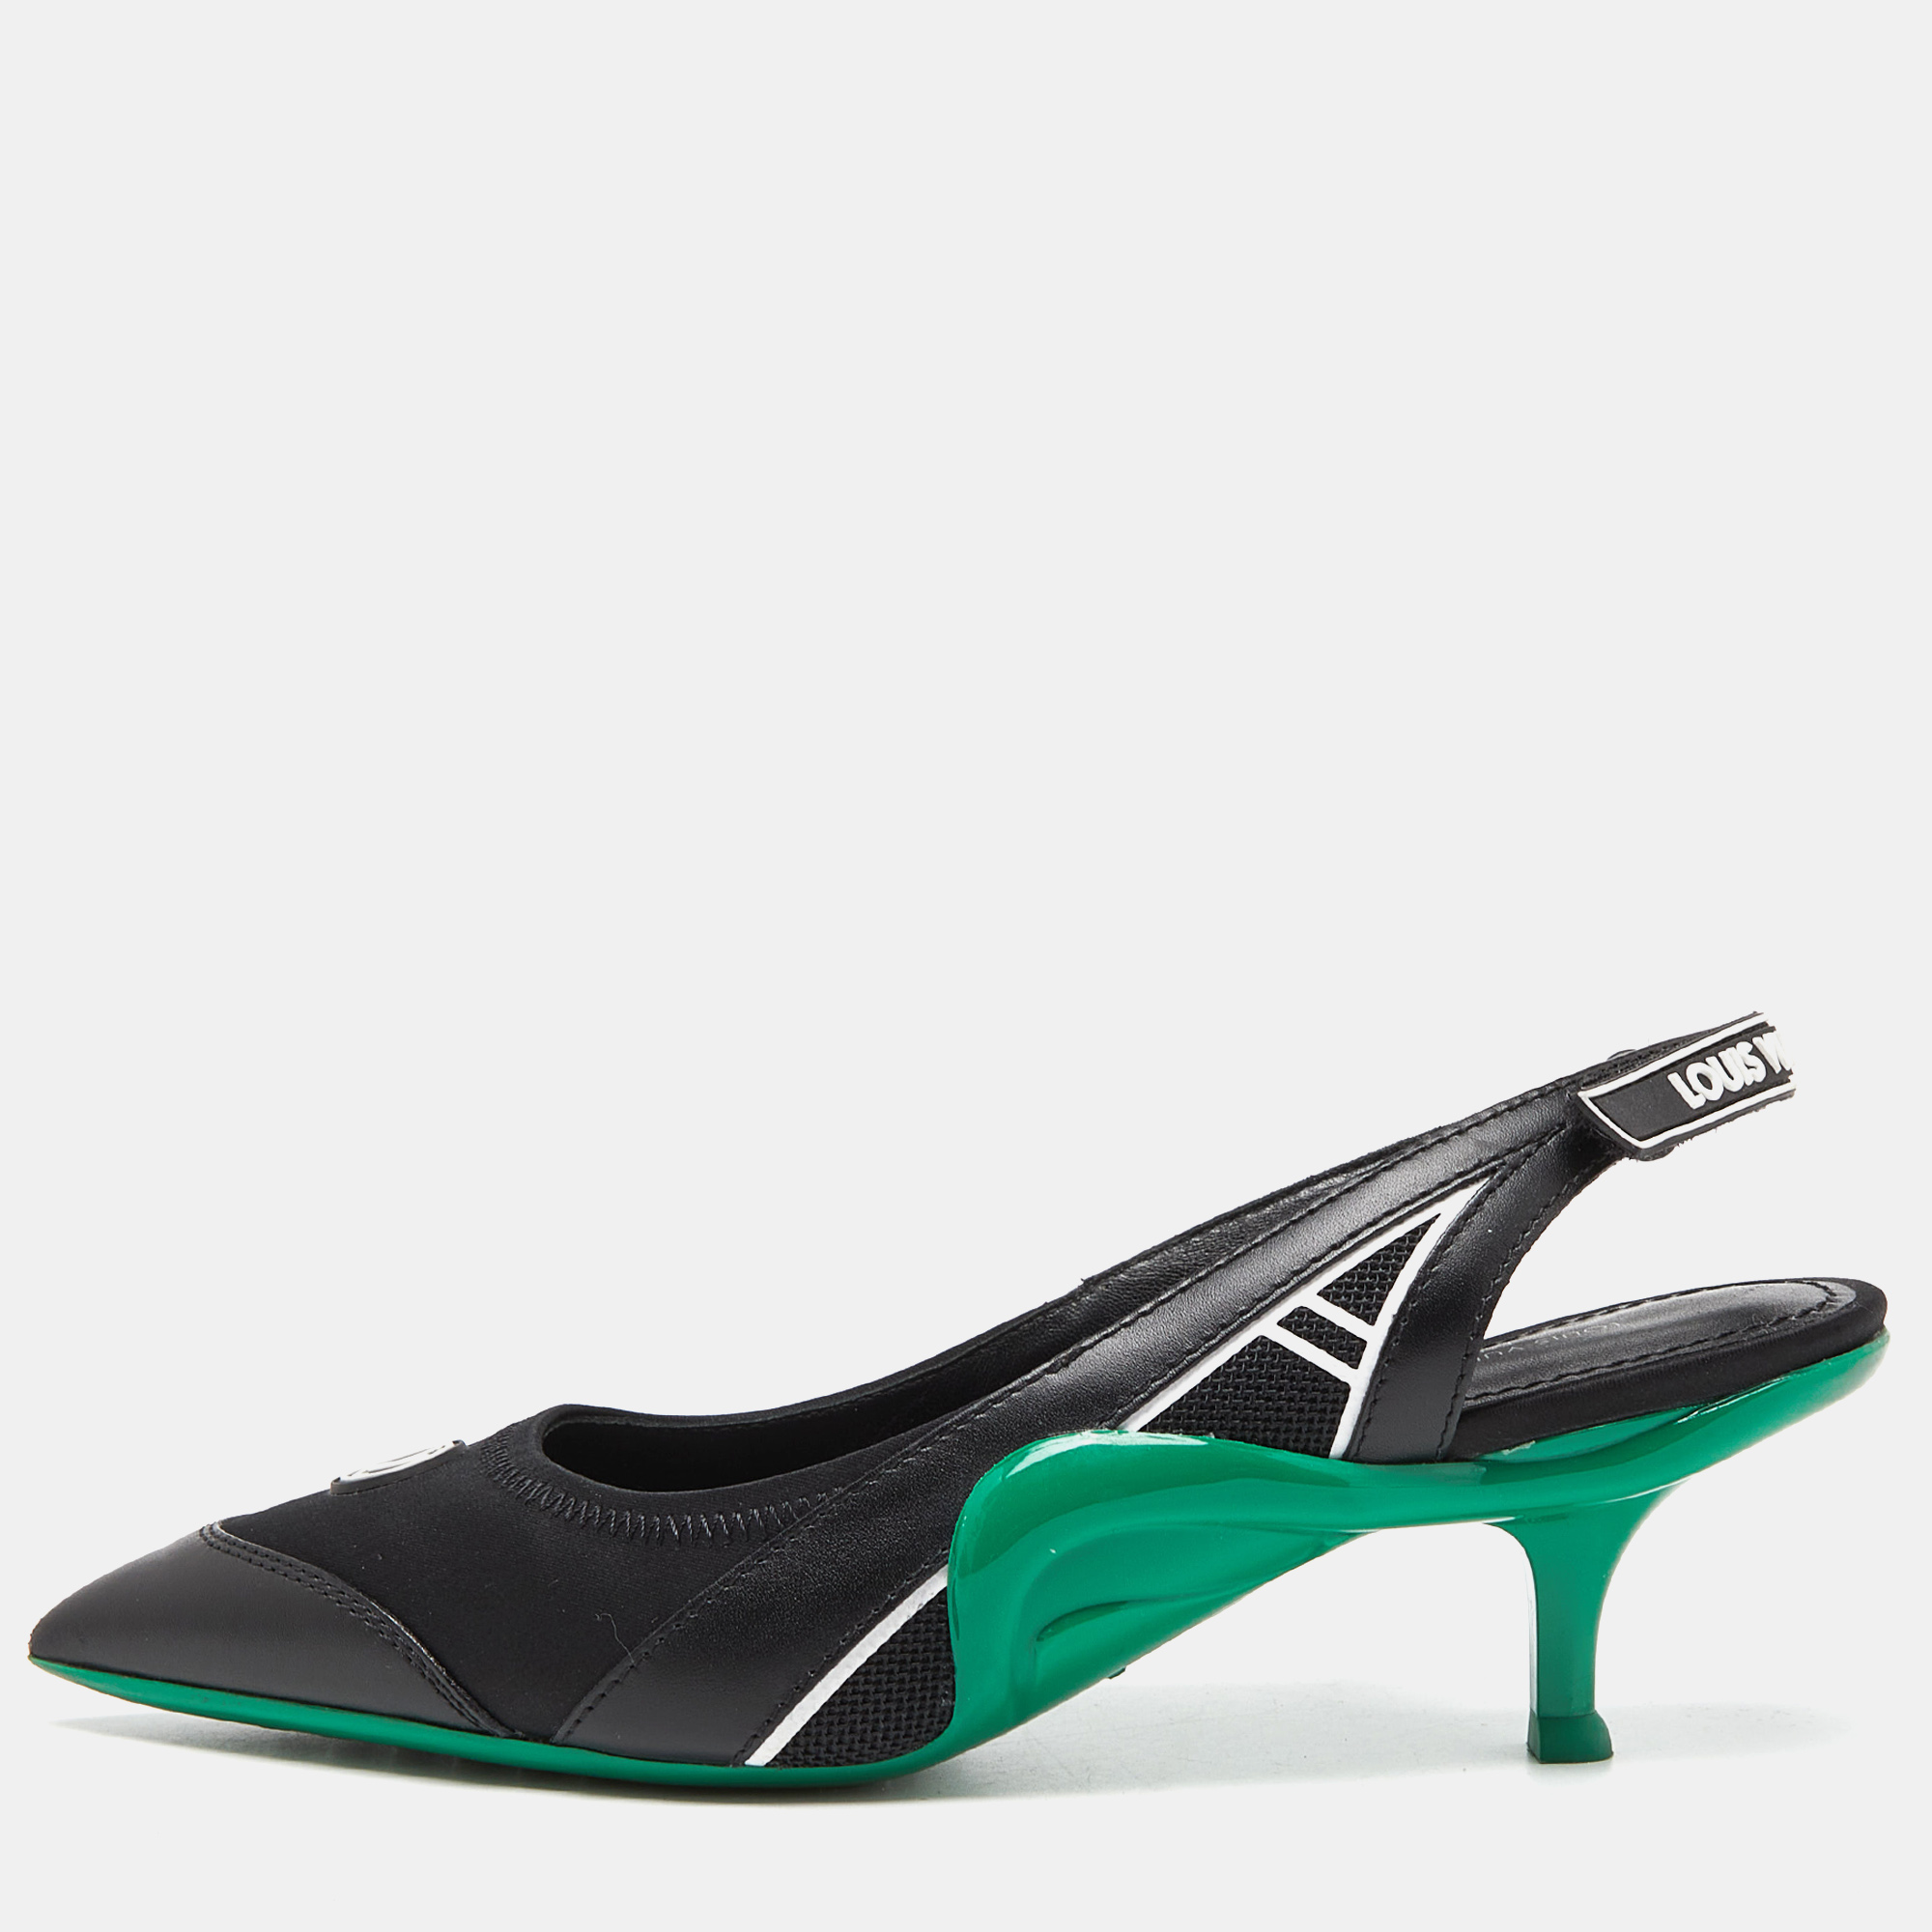 Pre-owned Louis Vuitton Black/green Satin Mesh And Leather Archlight Slingback Pumps Size 38